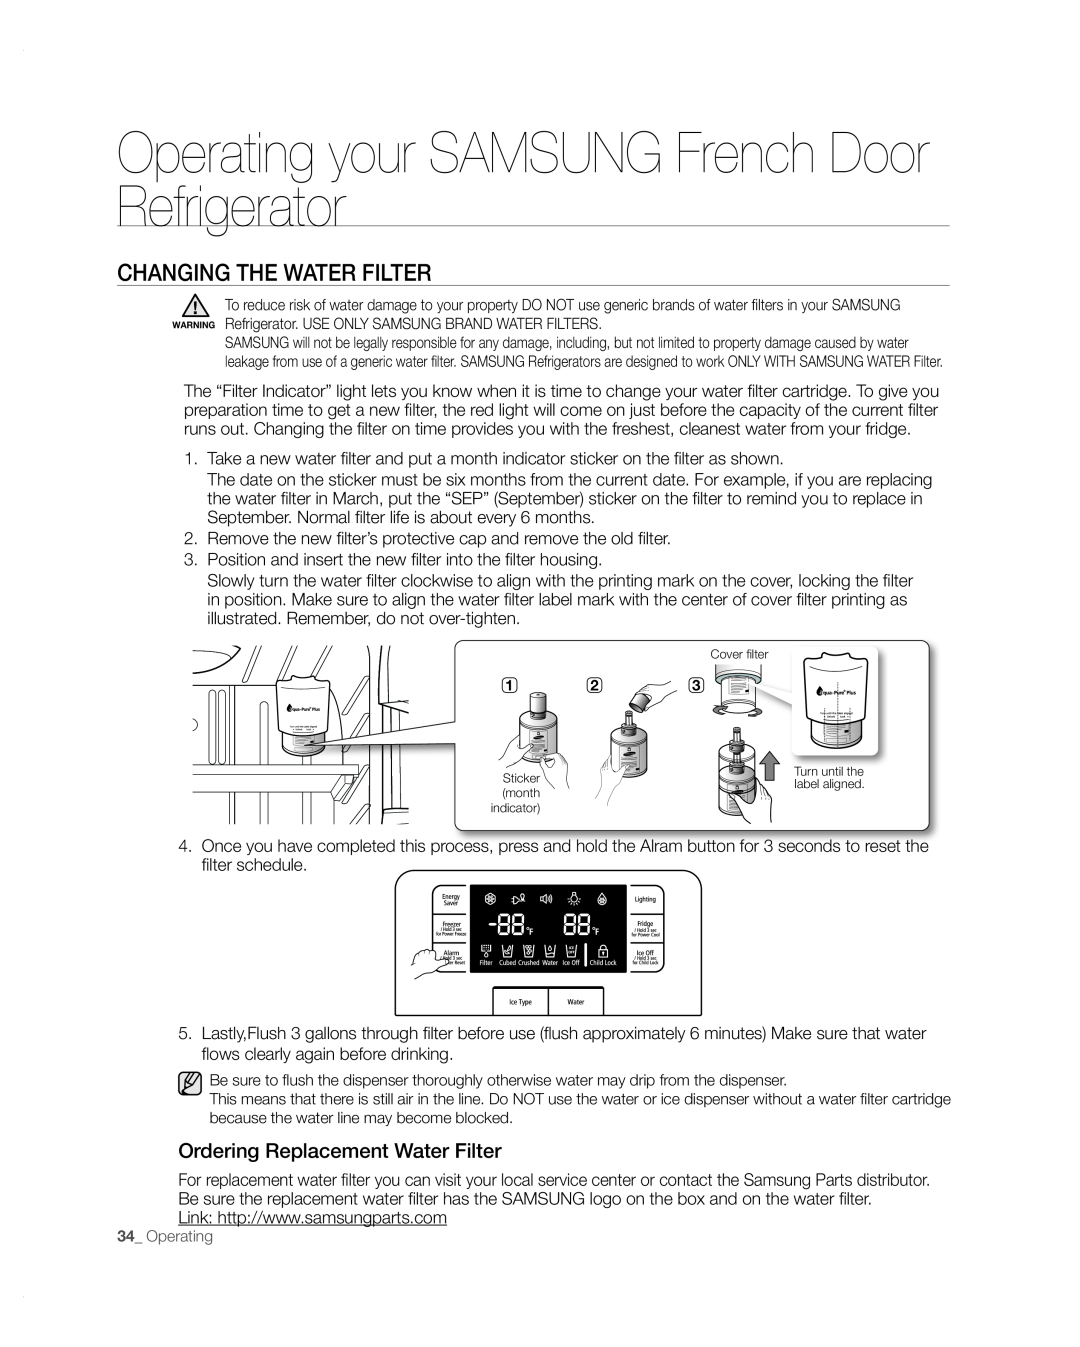 Samsung RFG297AARS/XAA user manual CHAnGinG tHE wAtER FiLtER, Operating your SAMSUNG French Door Refrigerator 